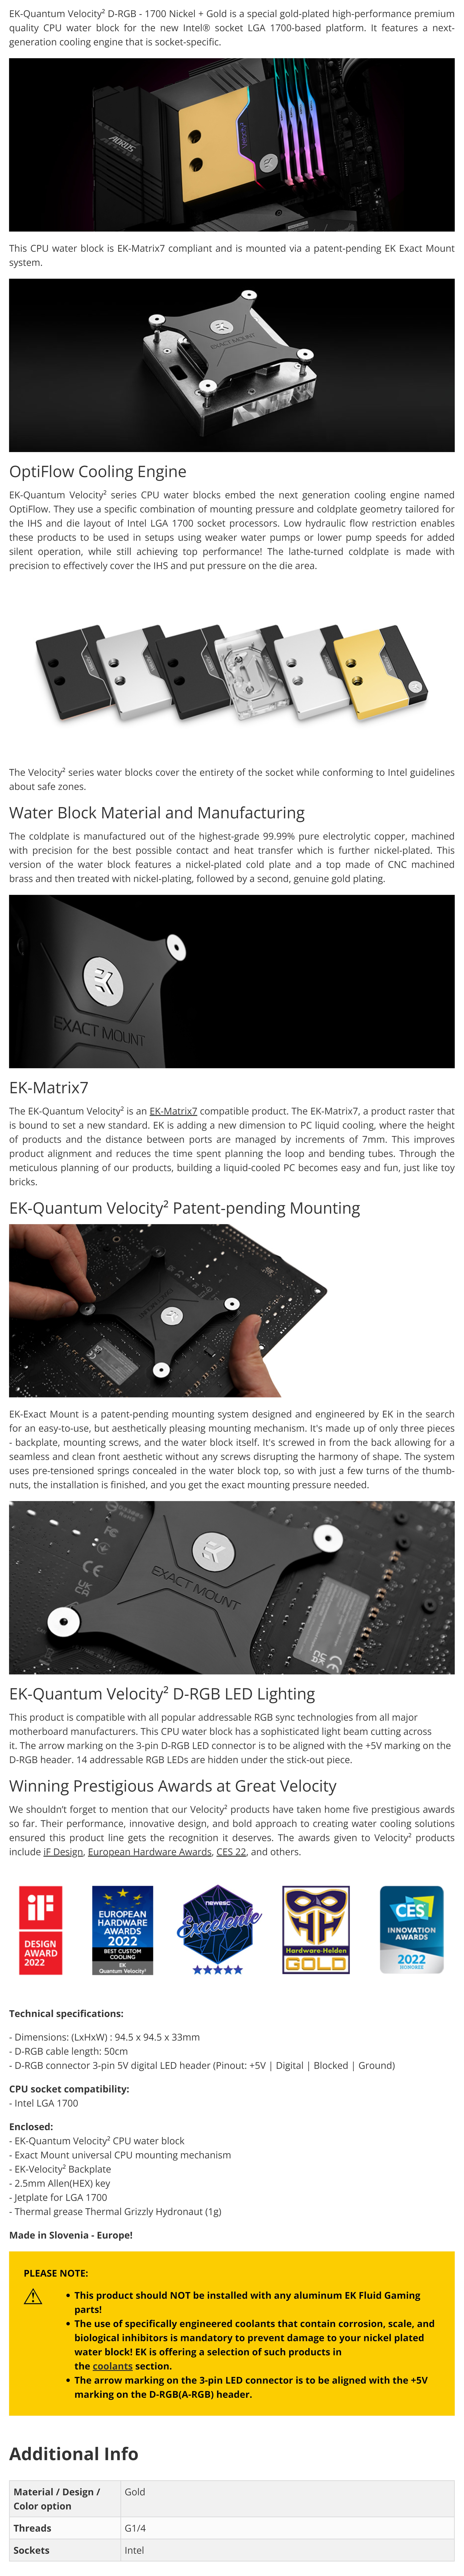 A large marketing image providing additional information about the product EK Quantum Velocity2 D-RGB 1700 Nickel/Gold CPU Waterblock - Additional alt info not provided